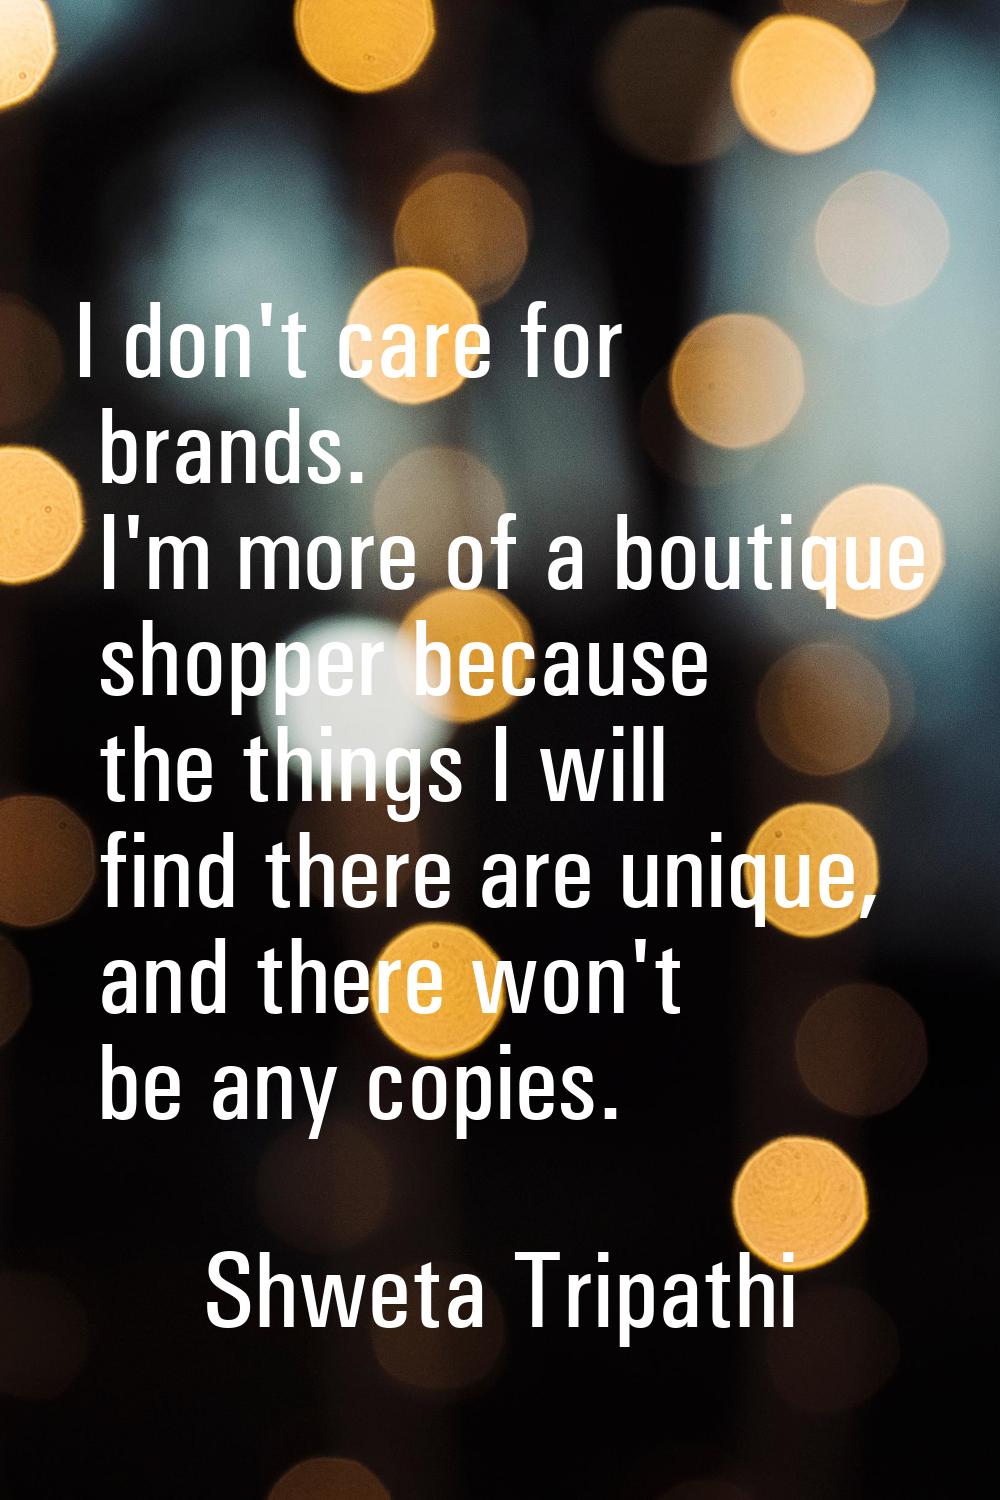 I don't care for brands. I'm more of a boutique shopper because the things I will find there are un